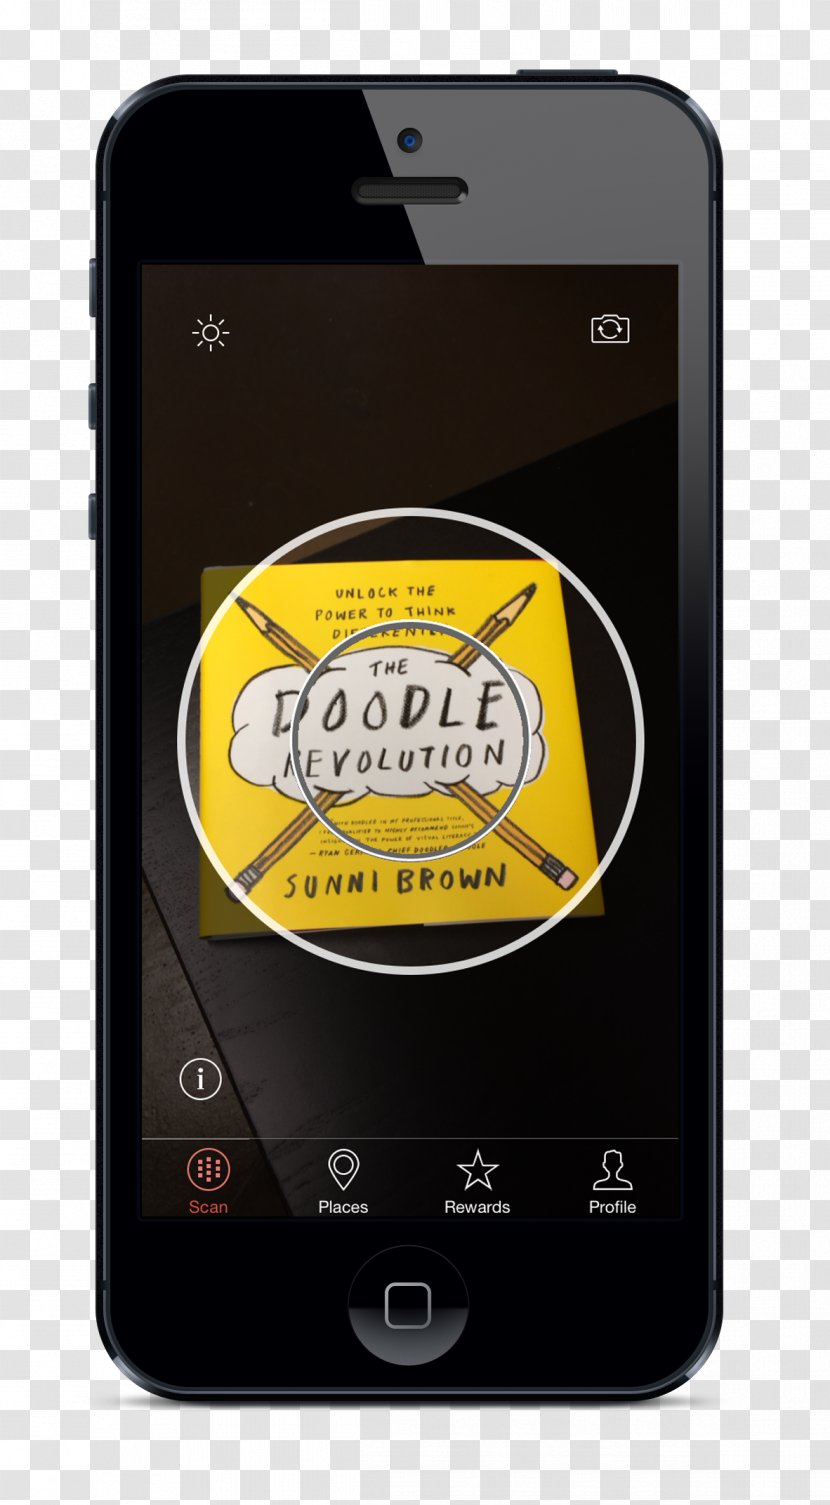 Feature Phone Smartphone The Doodle Revolution: Unlock Power To Think Differently Mobile Accessories - Technology Transparent PNG